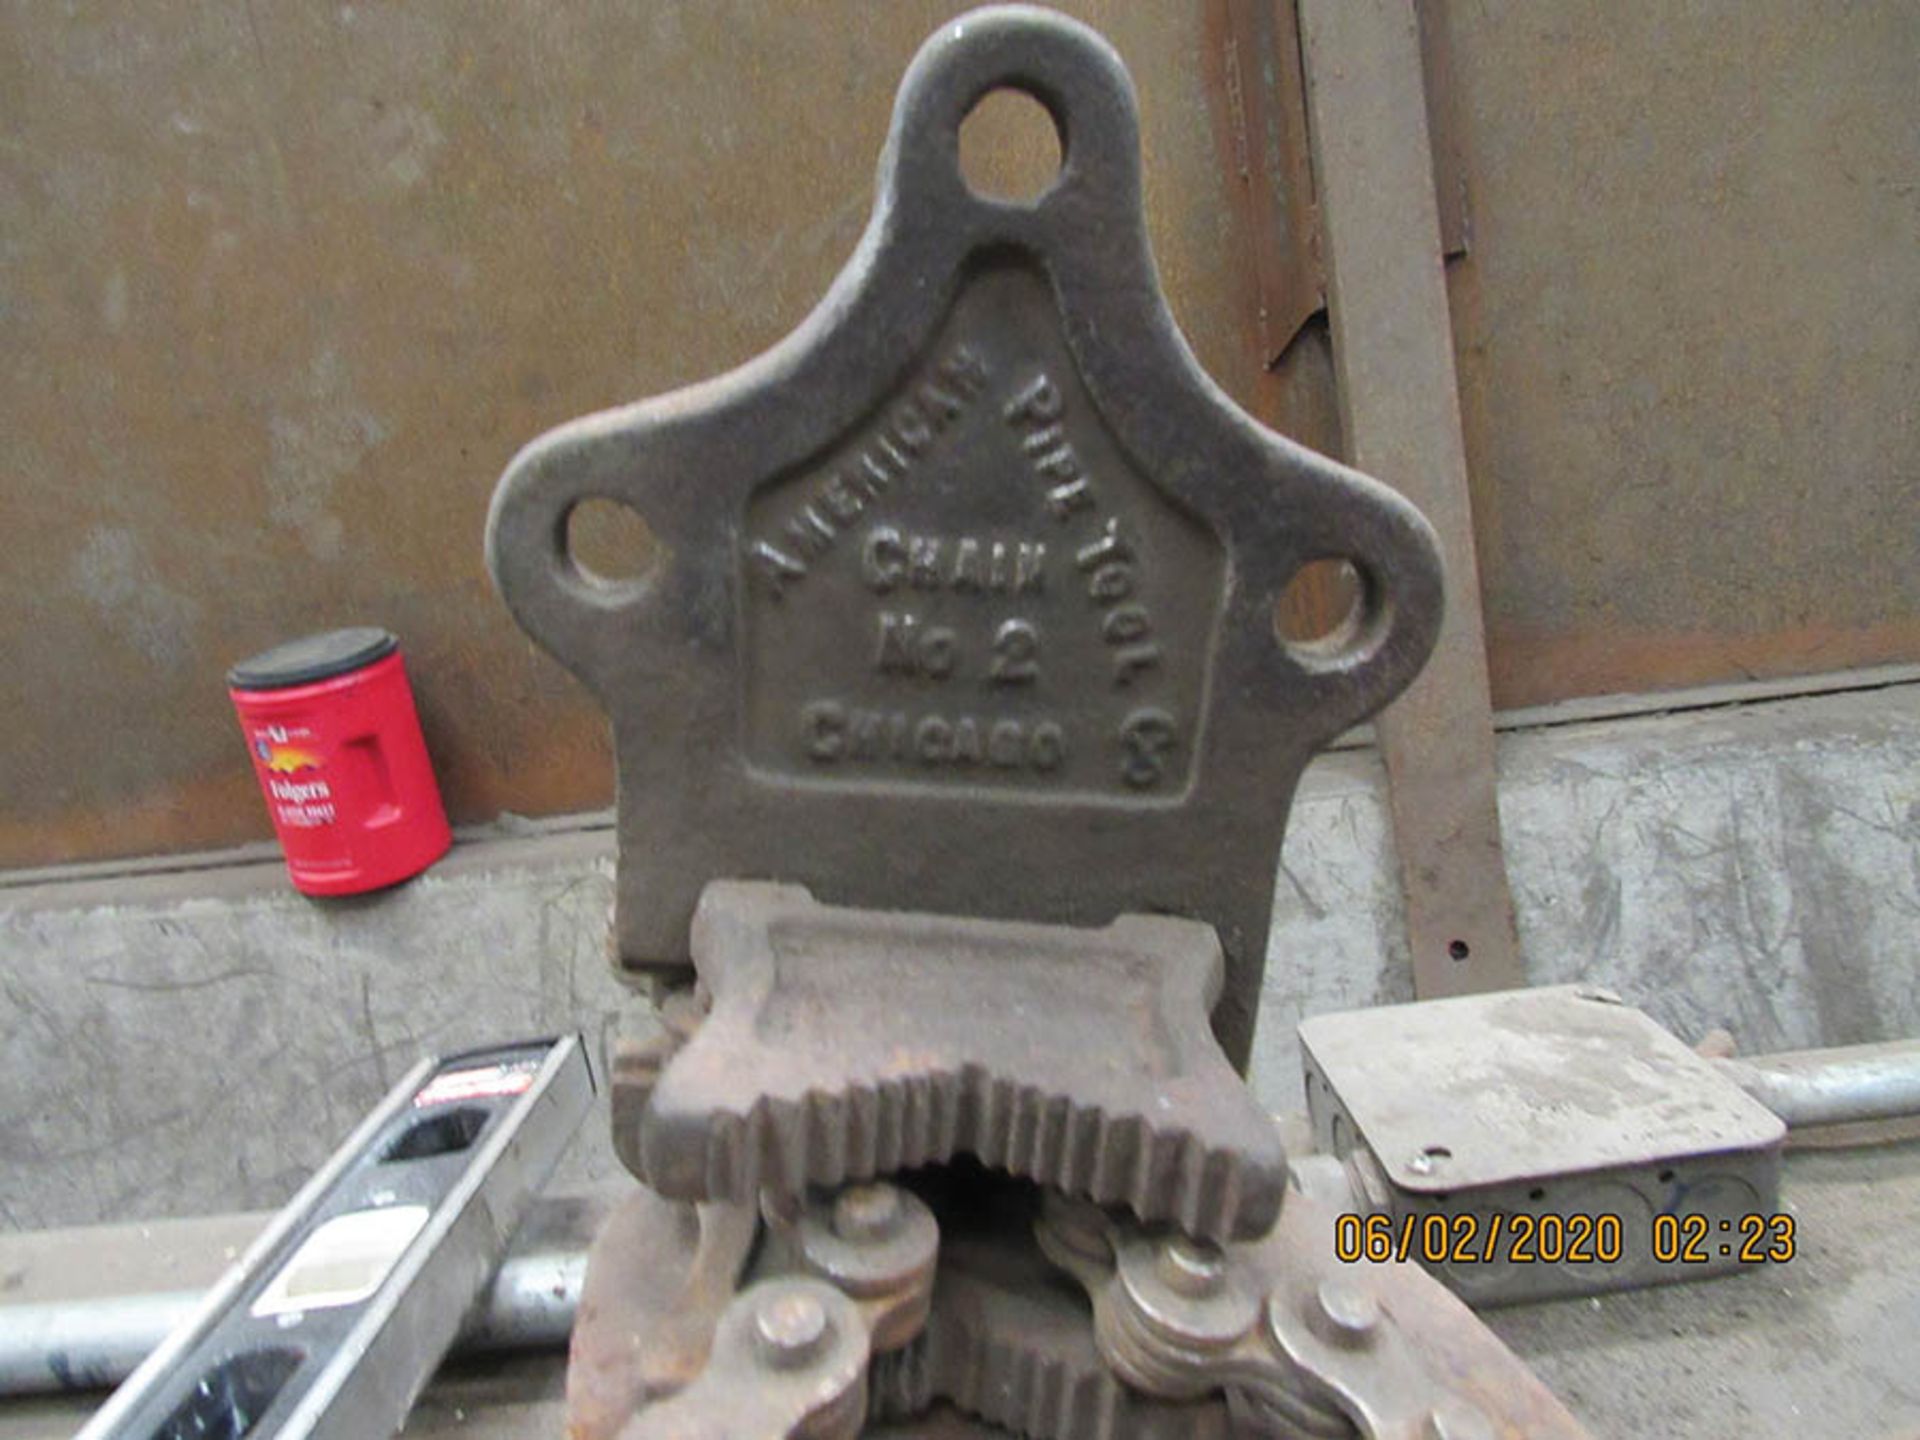 SHEET METAL LIFTER, AMERICAN PIPE TOOL CHAIN, AND NO. 2 CHAIN VISE